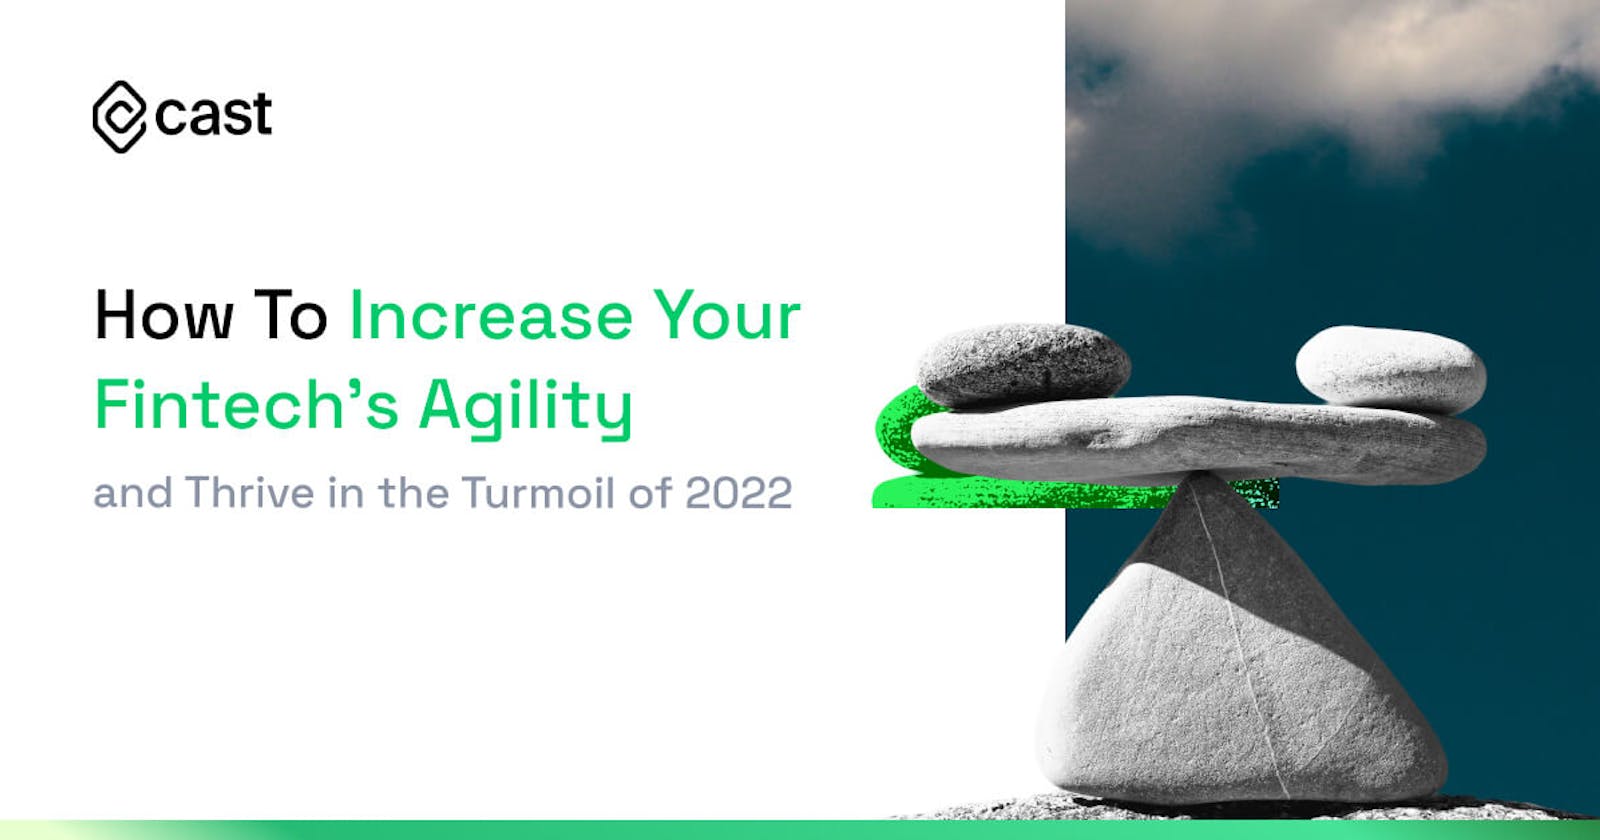 How to Increase Your Fintech's Agility and Thrive in the Turmoil of 2022?